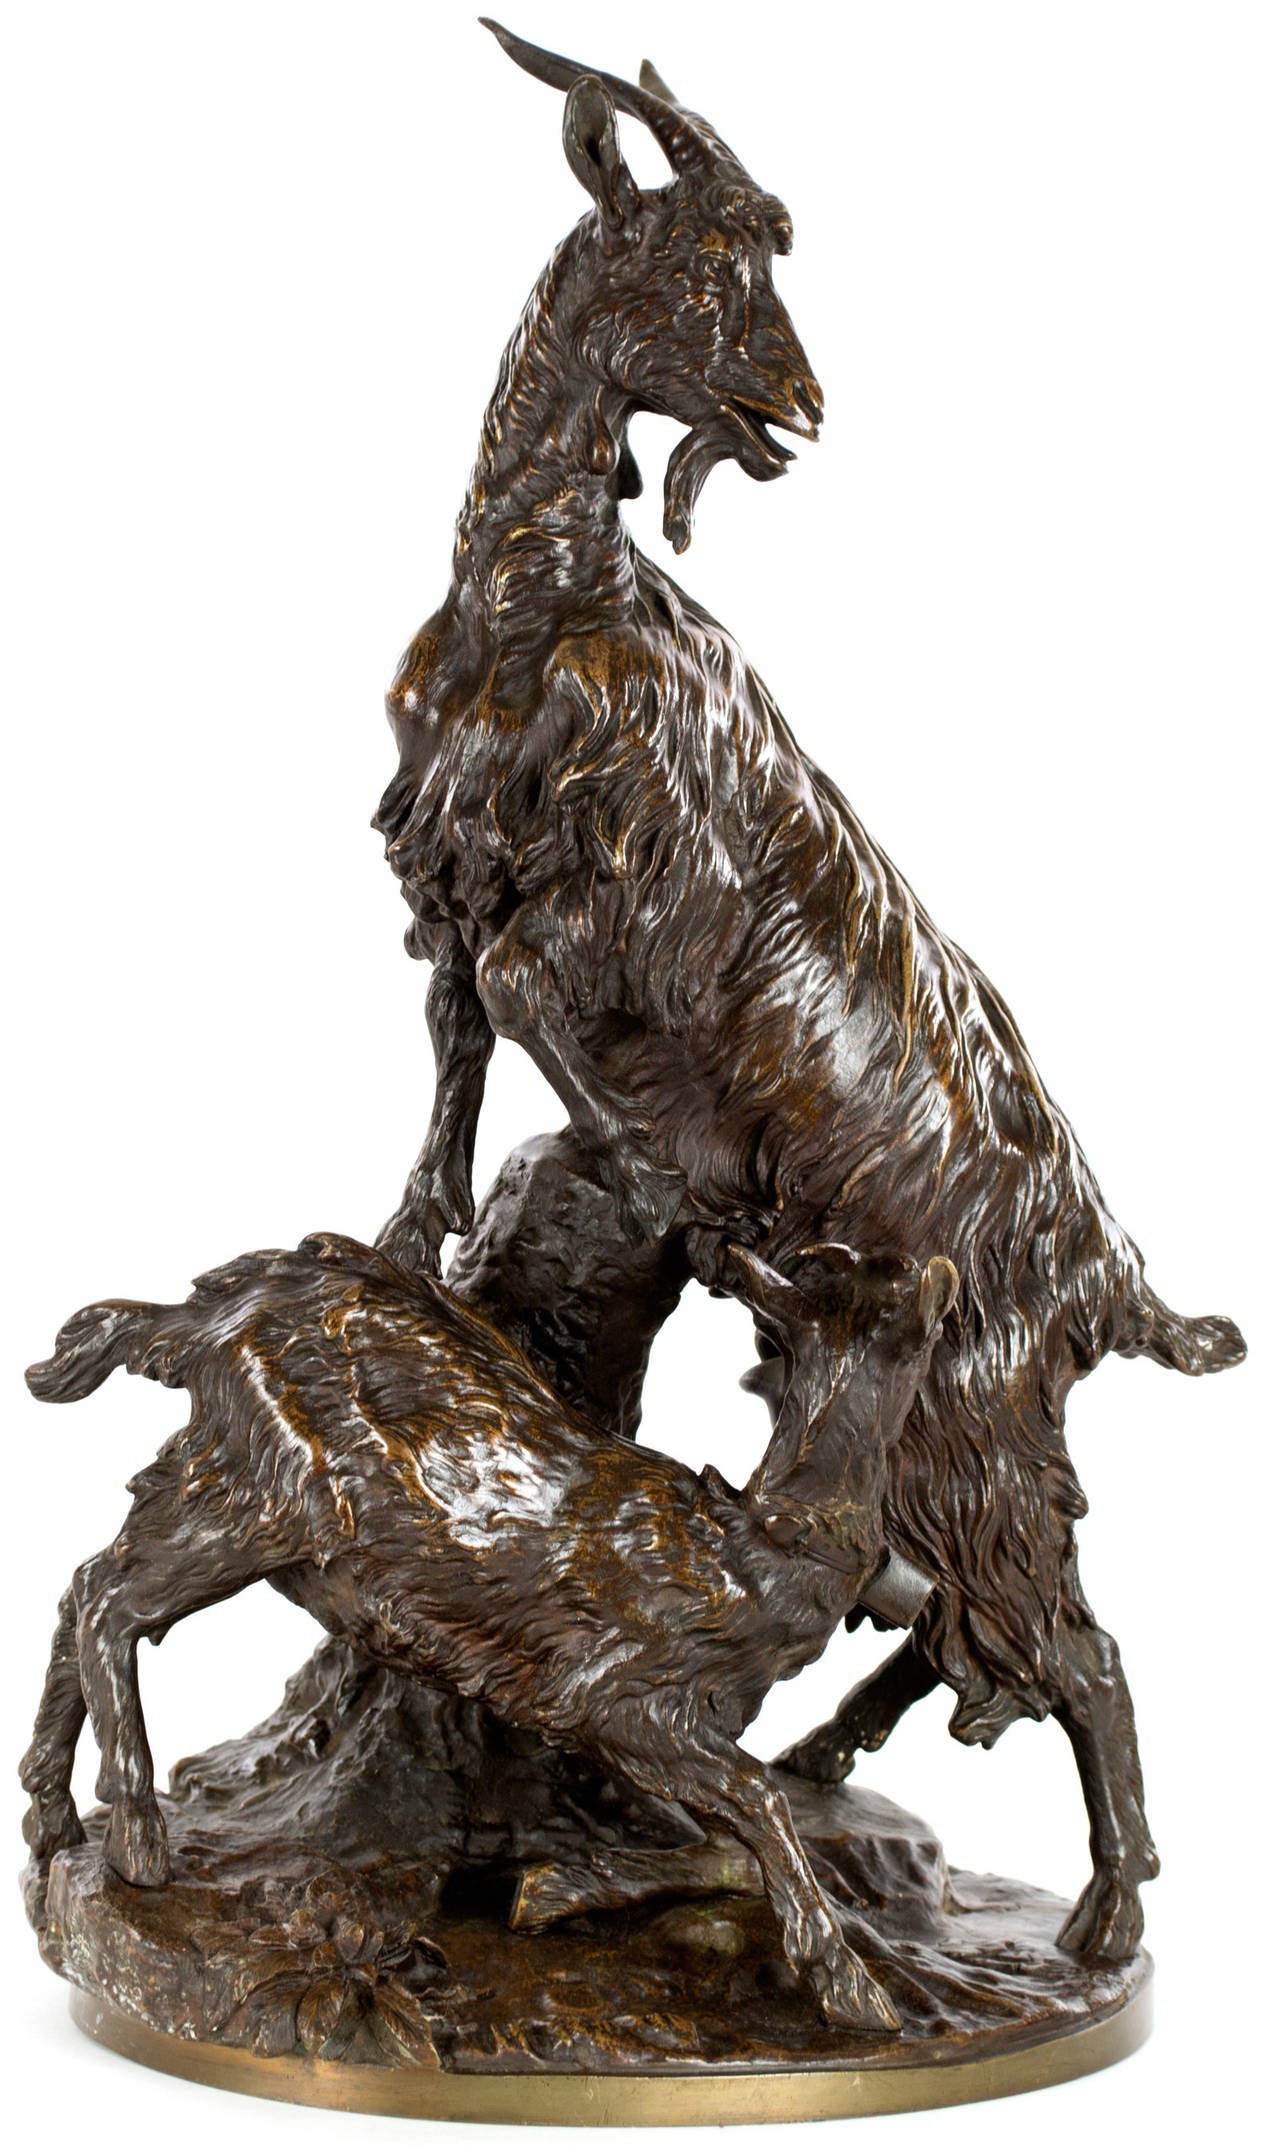 Émile Pinedo Figurative Sculpture - A Group of Goats by Emile Pinedo and Tiffany & Co.